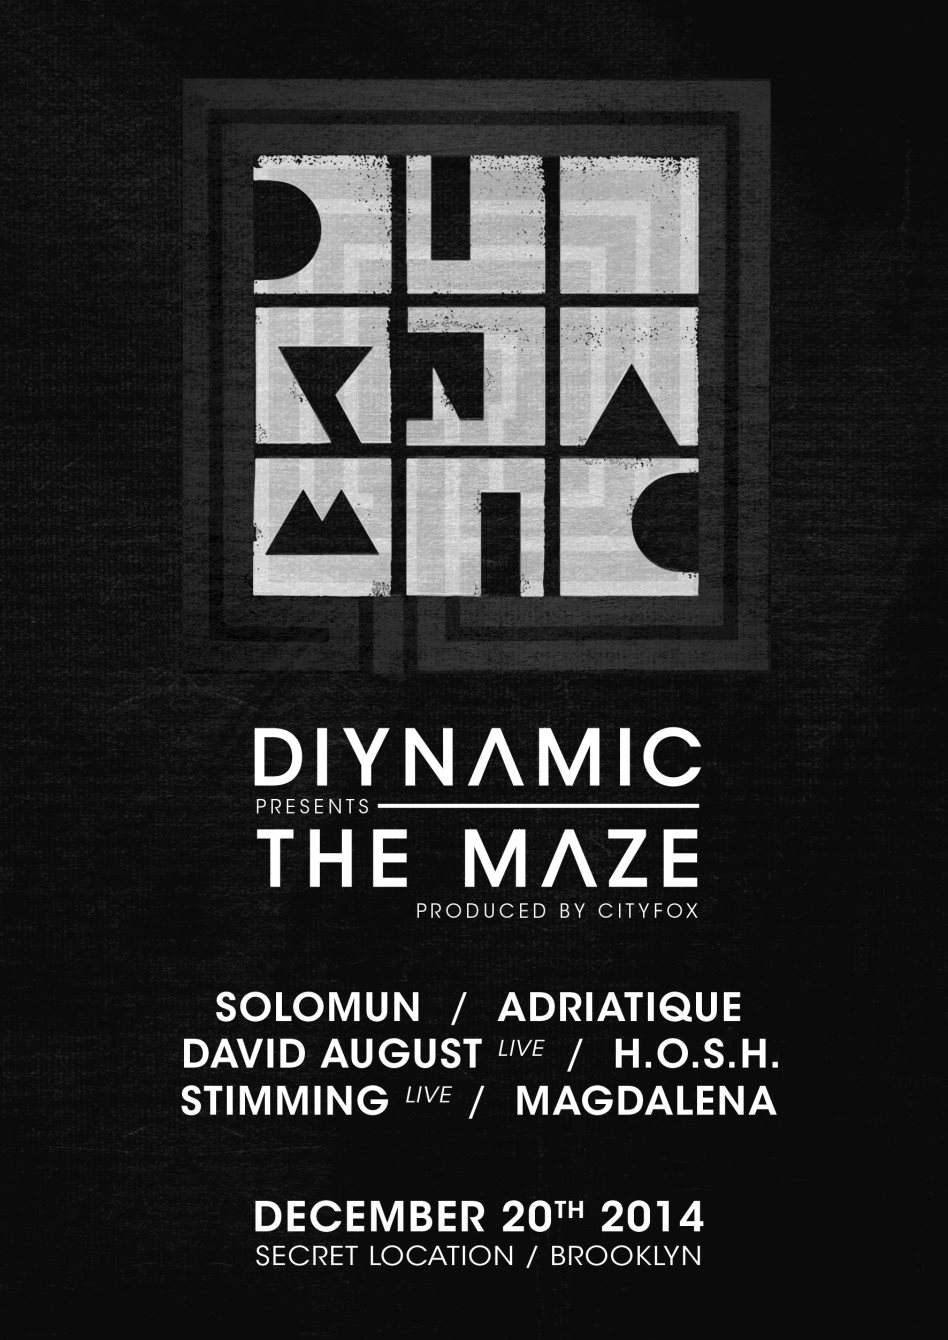 Diynamic presents The Maze, Produced by Cityfox with Solomun, Adriatique, David August and More - Página trasera